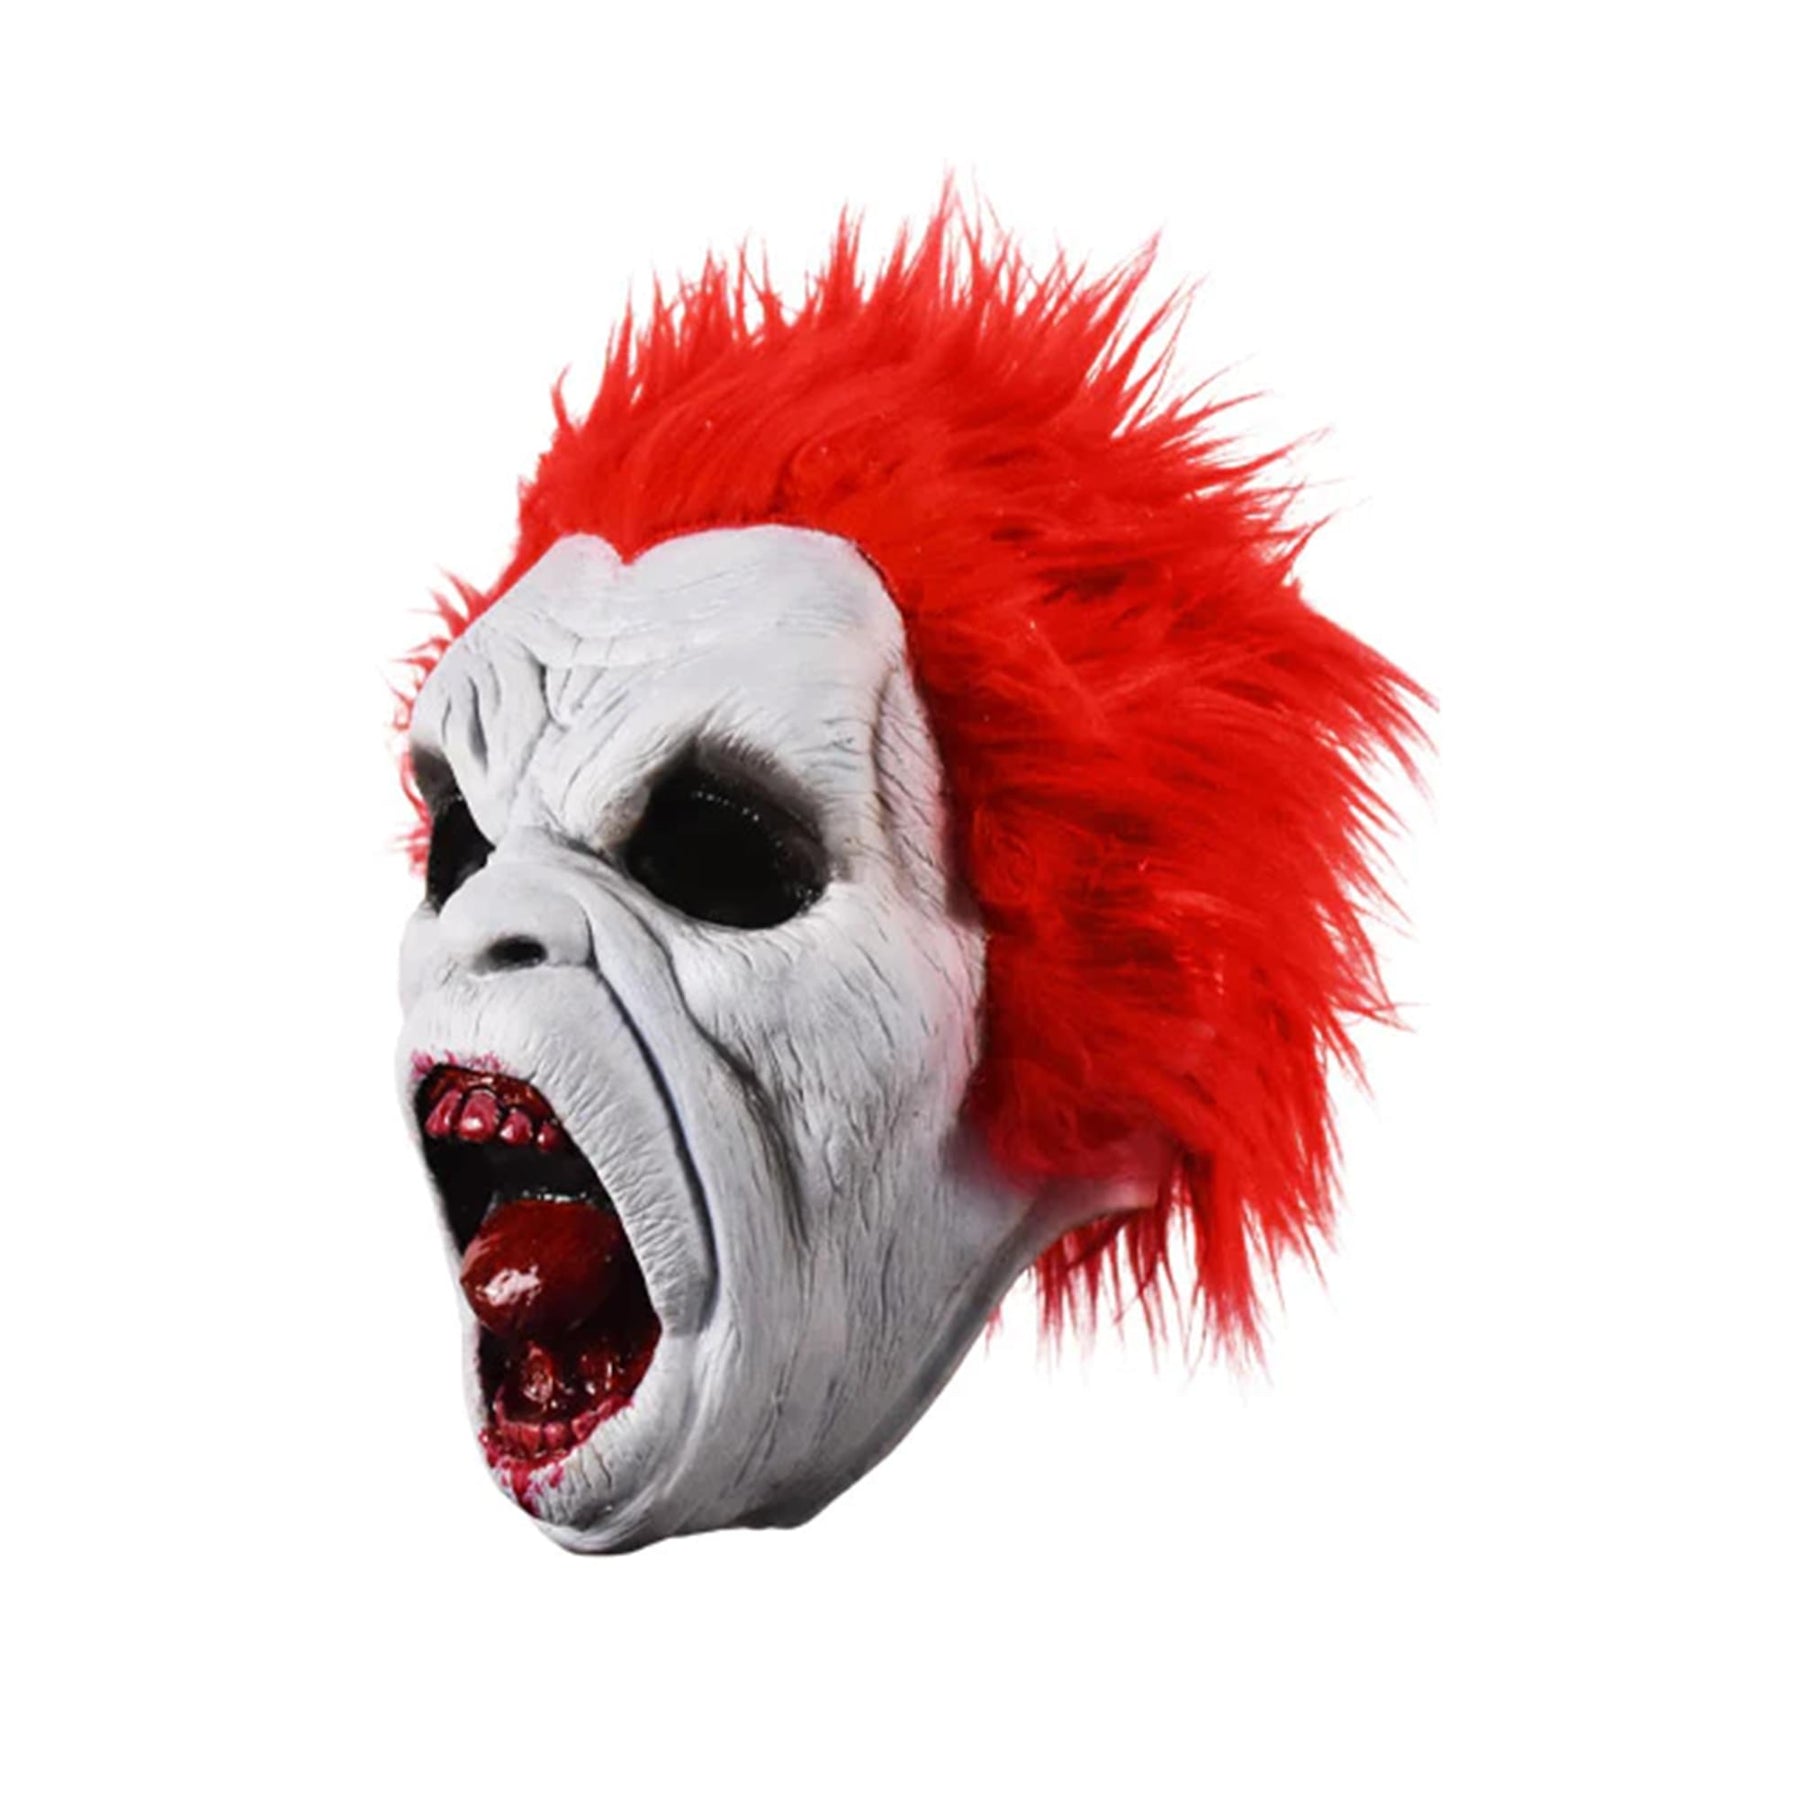 The Return of the Living Dead Trash Zombie Adult Costume Mask